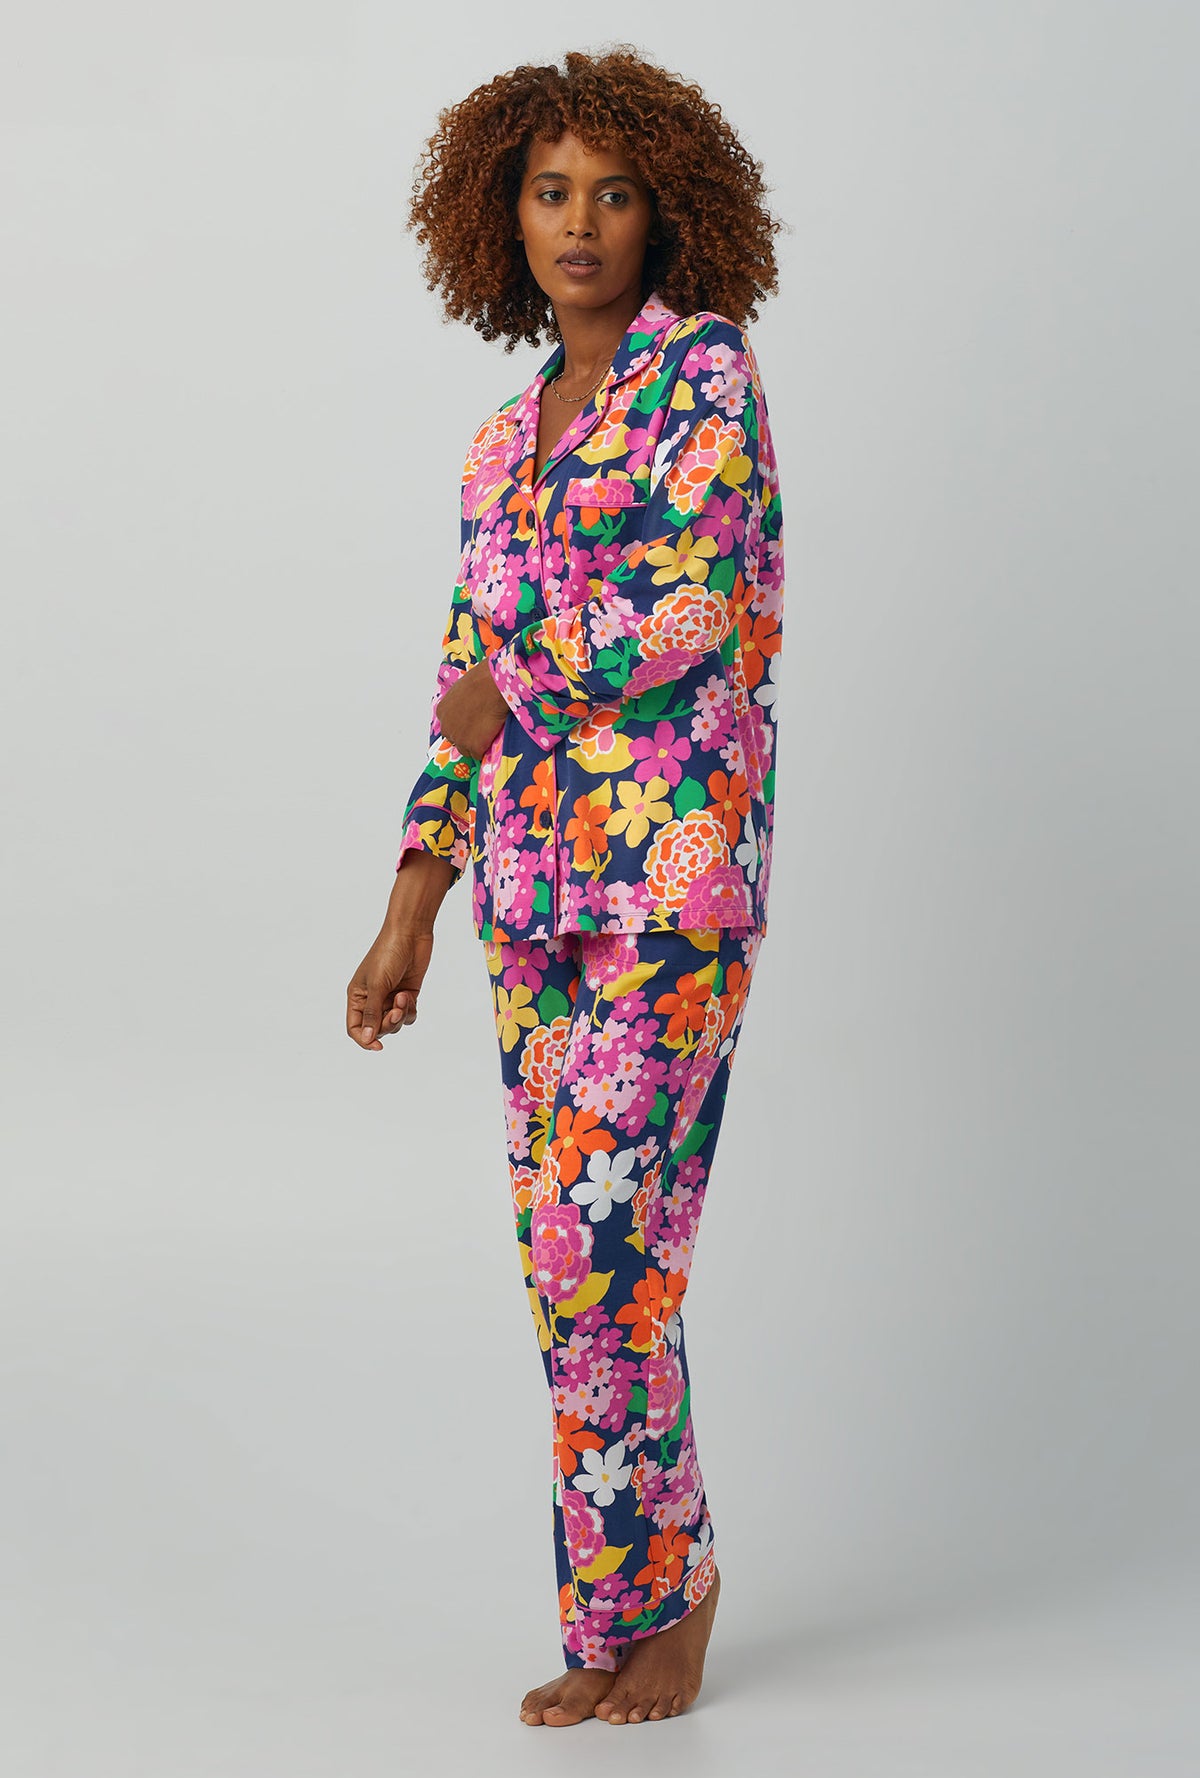 A lady wearing Long Sleeve Classic Stretch Jersey PJ Set with greenhouse floral print